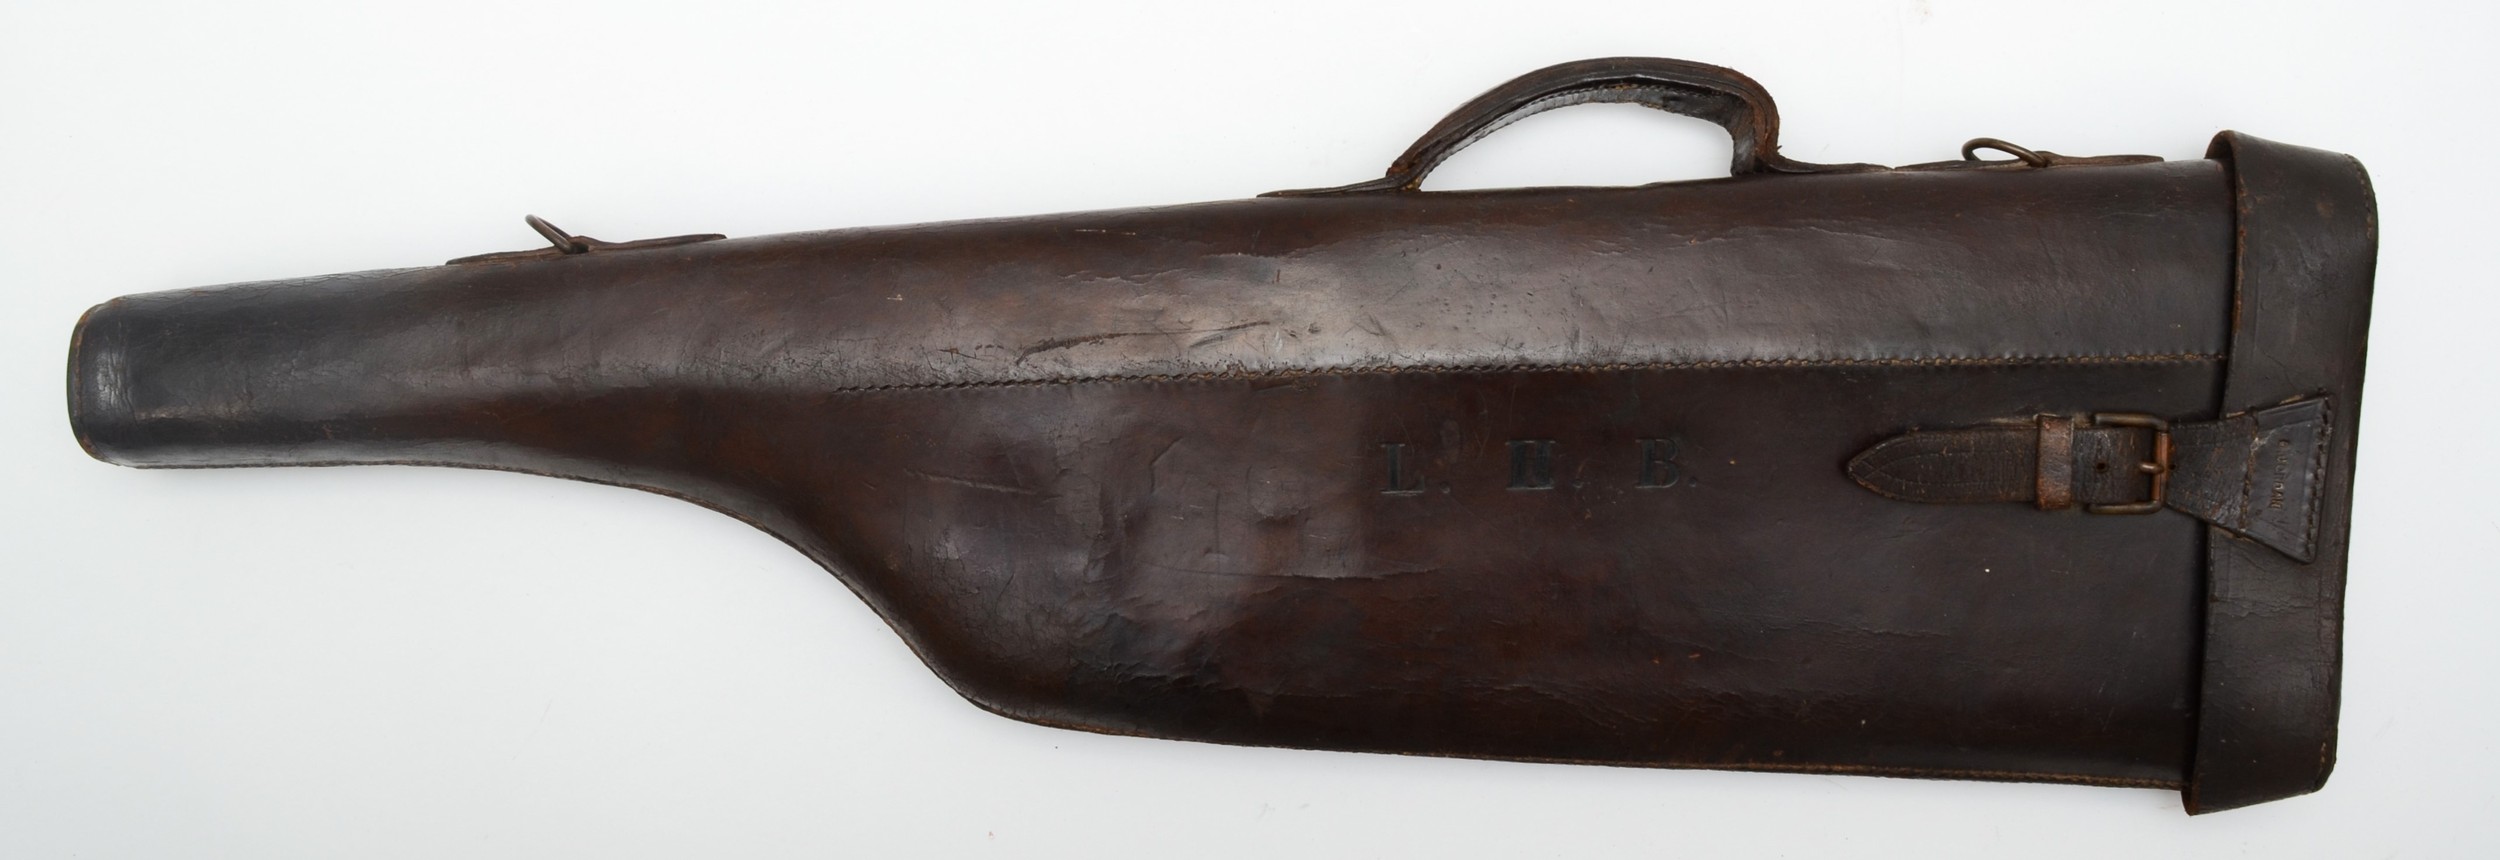 A vintage 'Mutton Chop' leather gun case, initialed L.H.B. and stamped G. Jordan, 77cm - Image 2 of 6